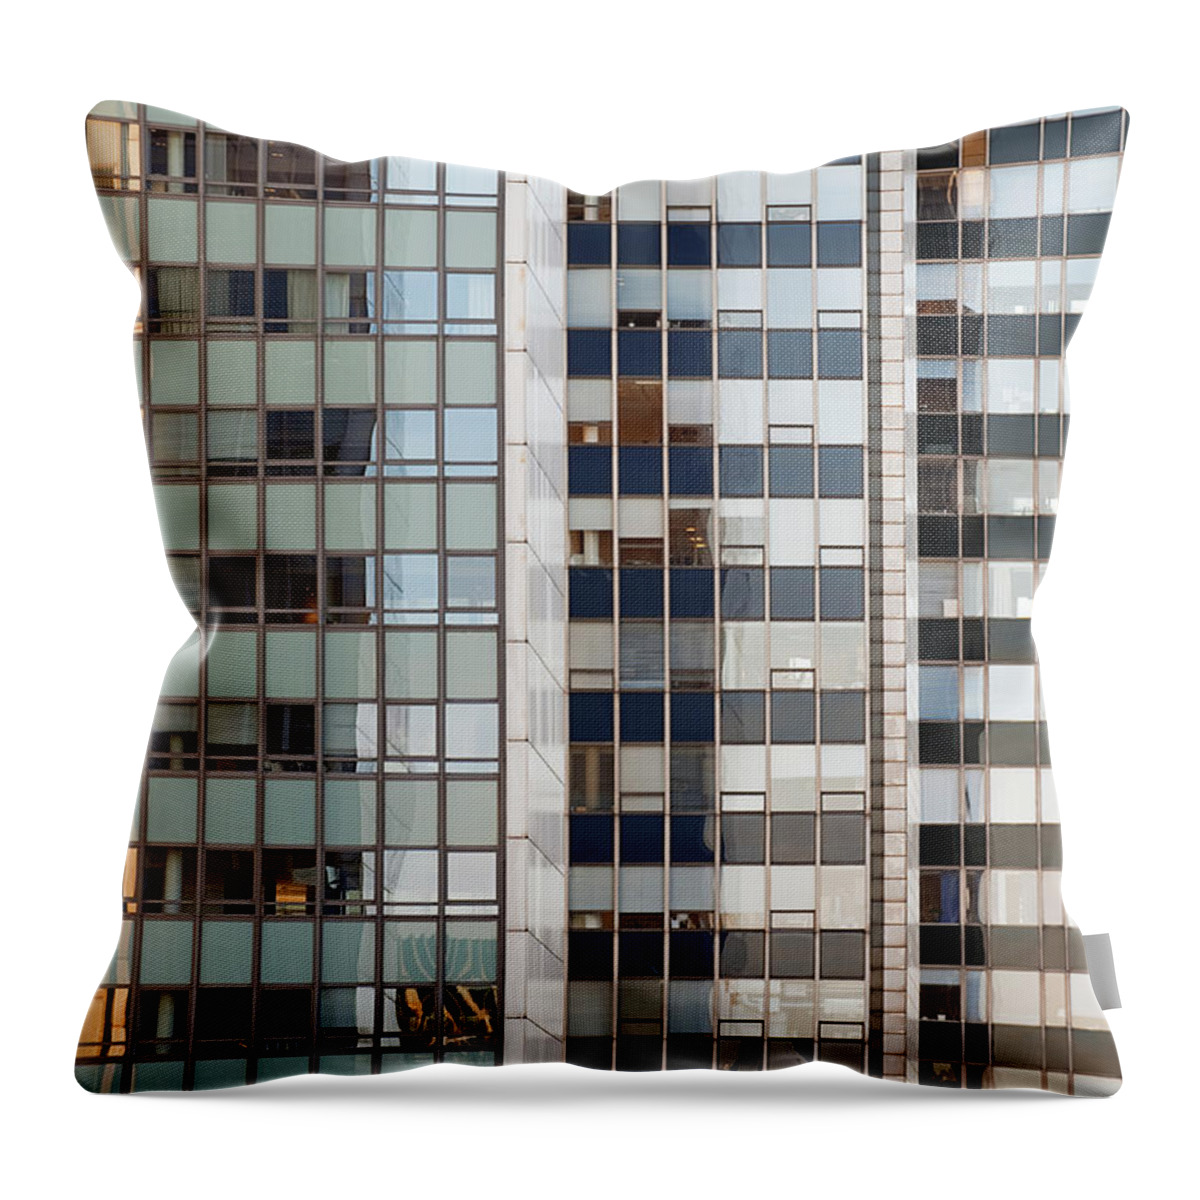 Sweden Throw Pillow featuring the photograph View Of Sergels Torg, Full Frame by Samuelsson, Kristofer